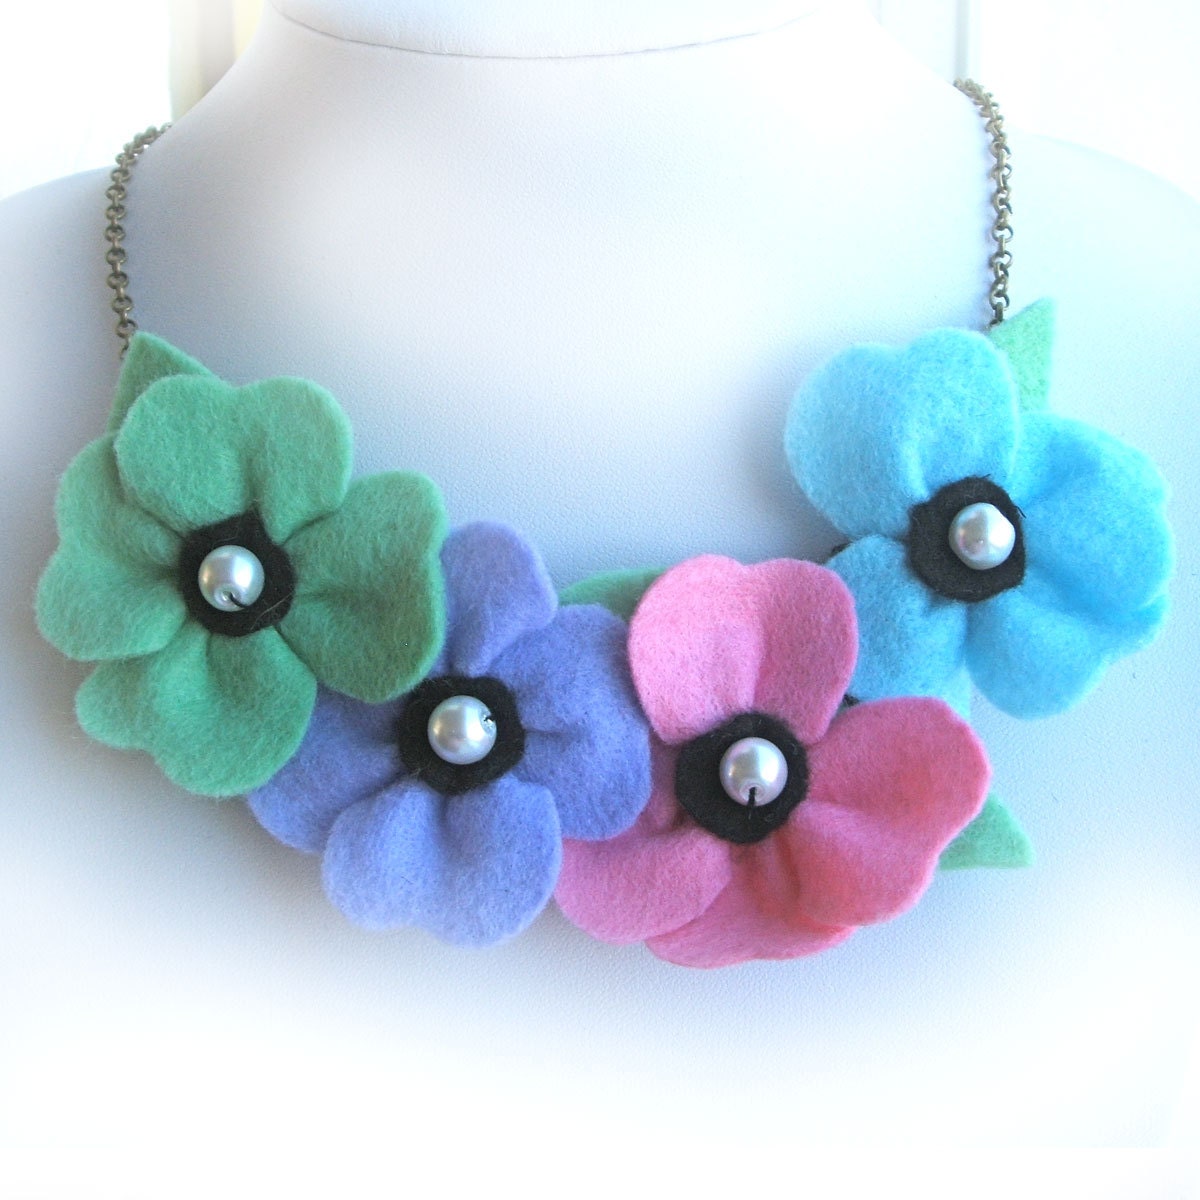 Pastel Poppy Bib Necklace, Goth Felt Flowers Statement Necklace in Pale Colours, Girlie Girl Jewellery